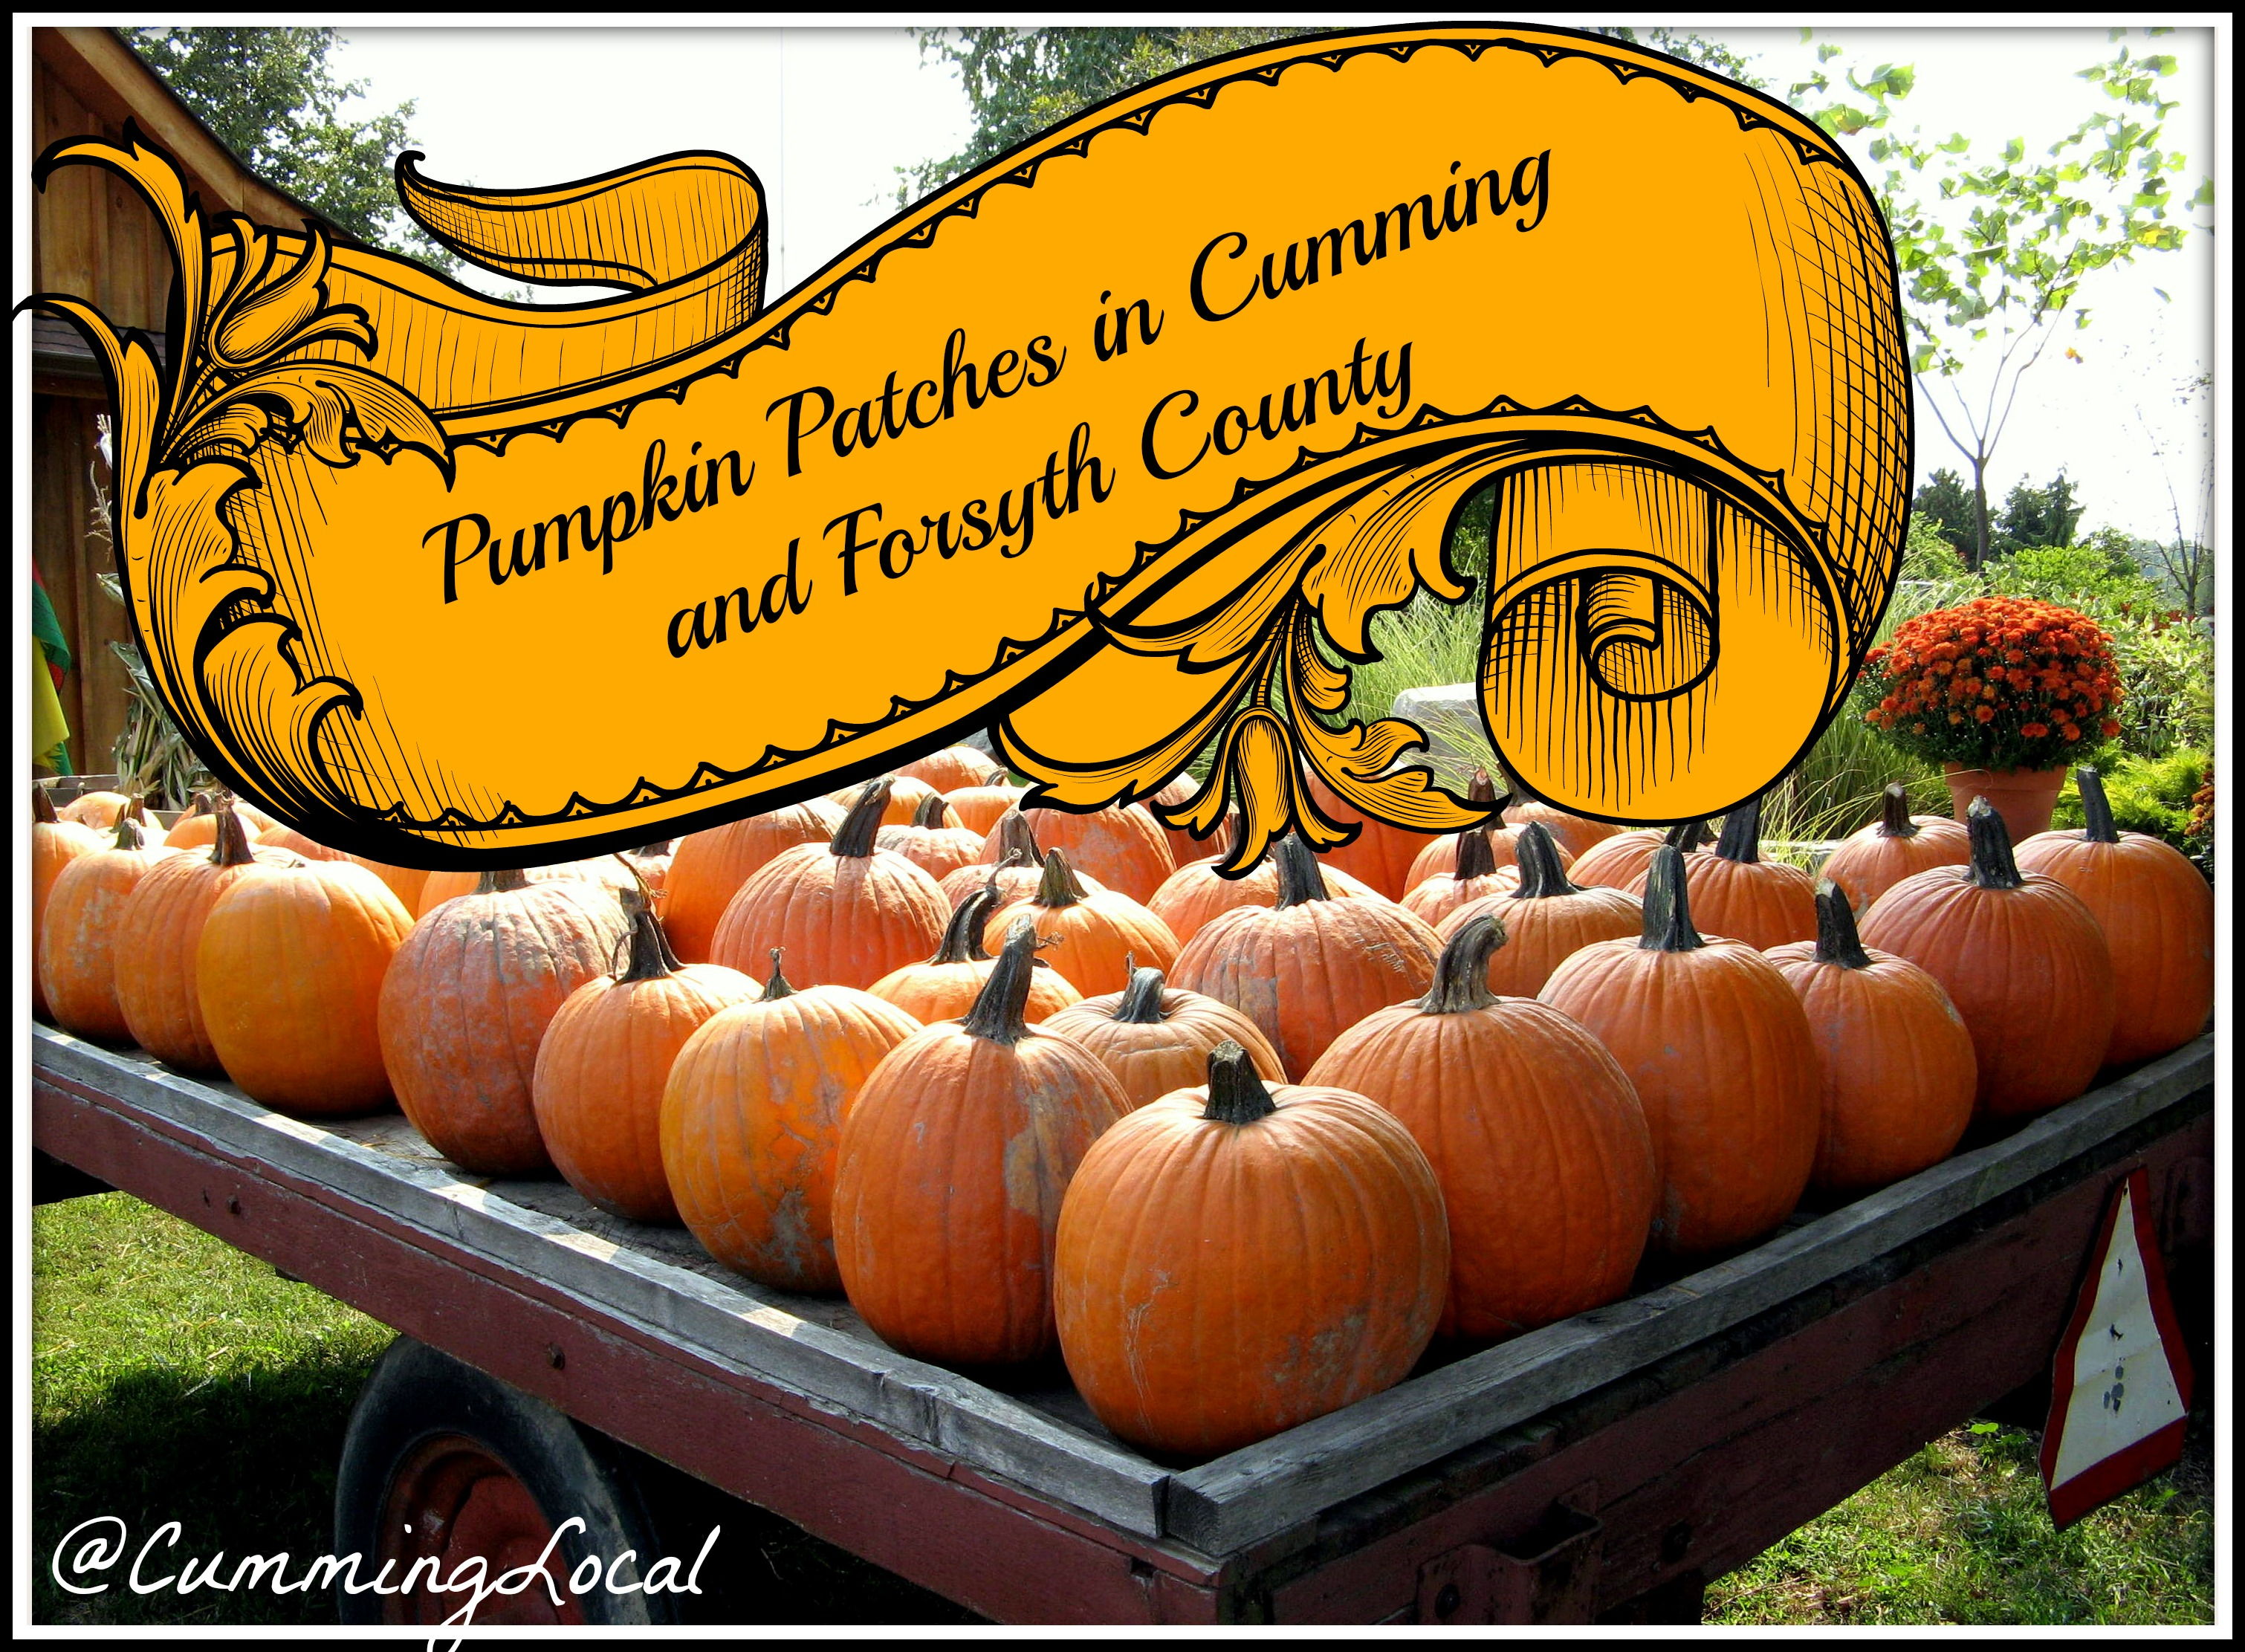 Pumpkin Patches in Cumming GA & Places to buy Pumpkins this season ...